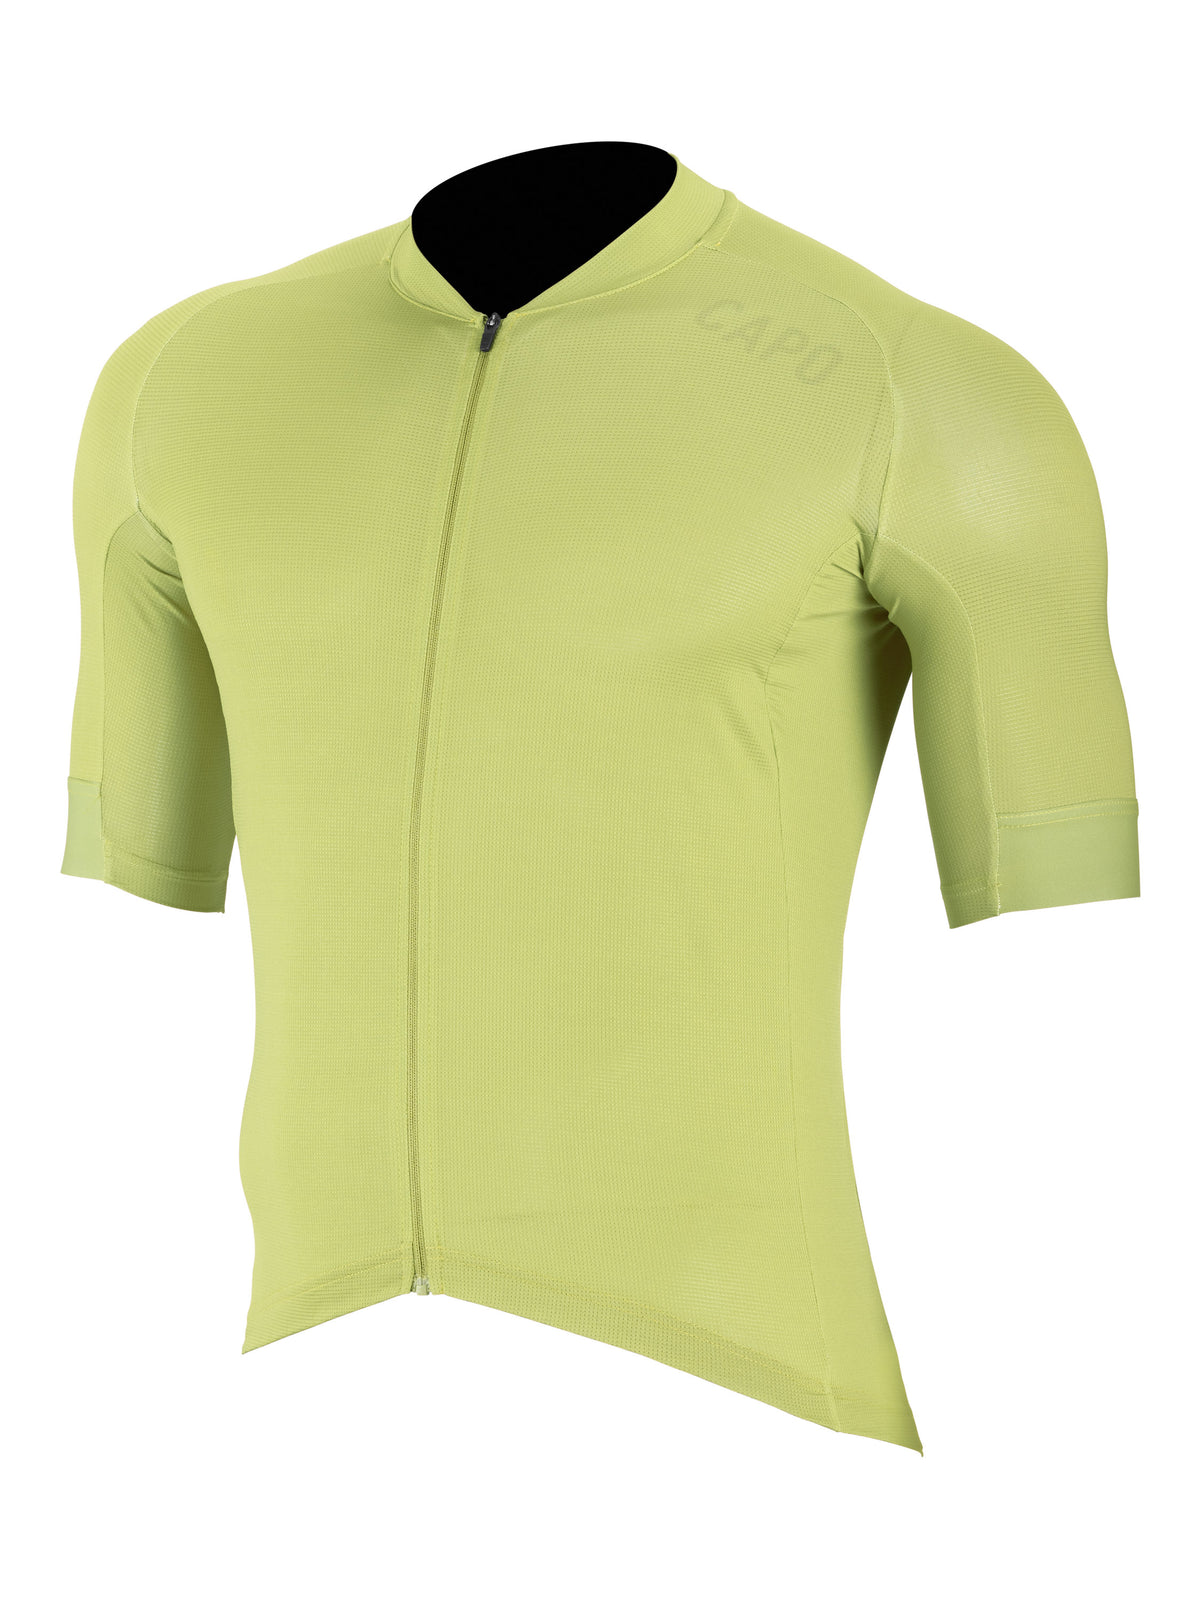 Signature Race Jersey - Willow